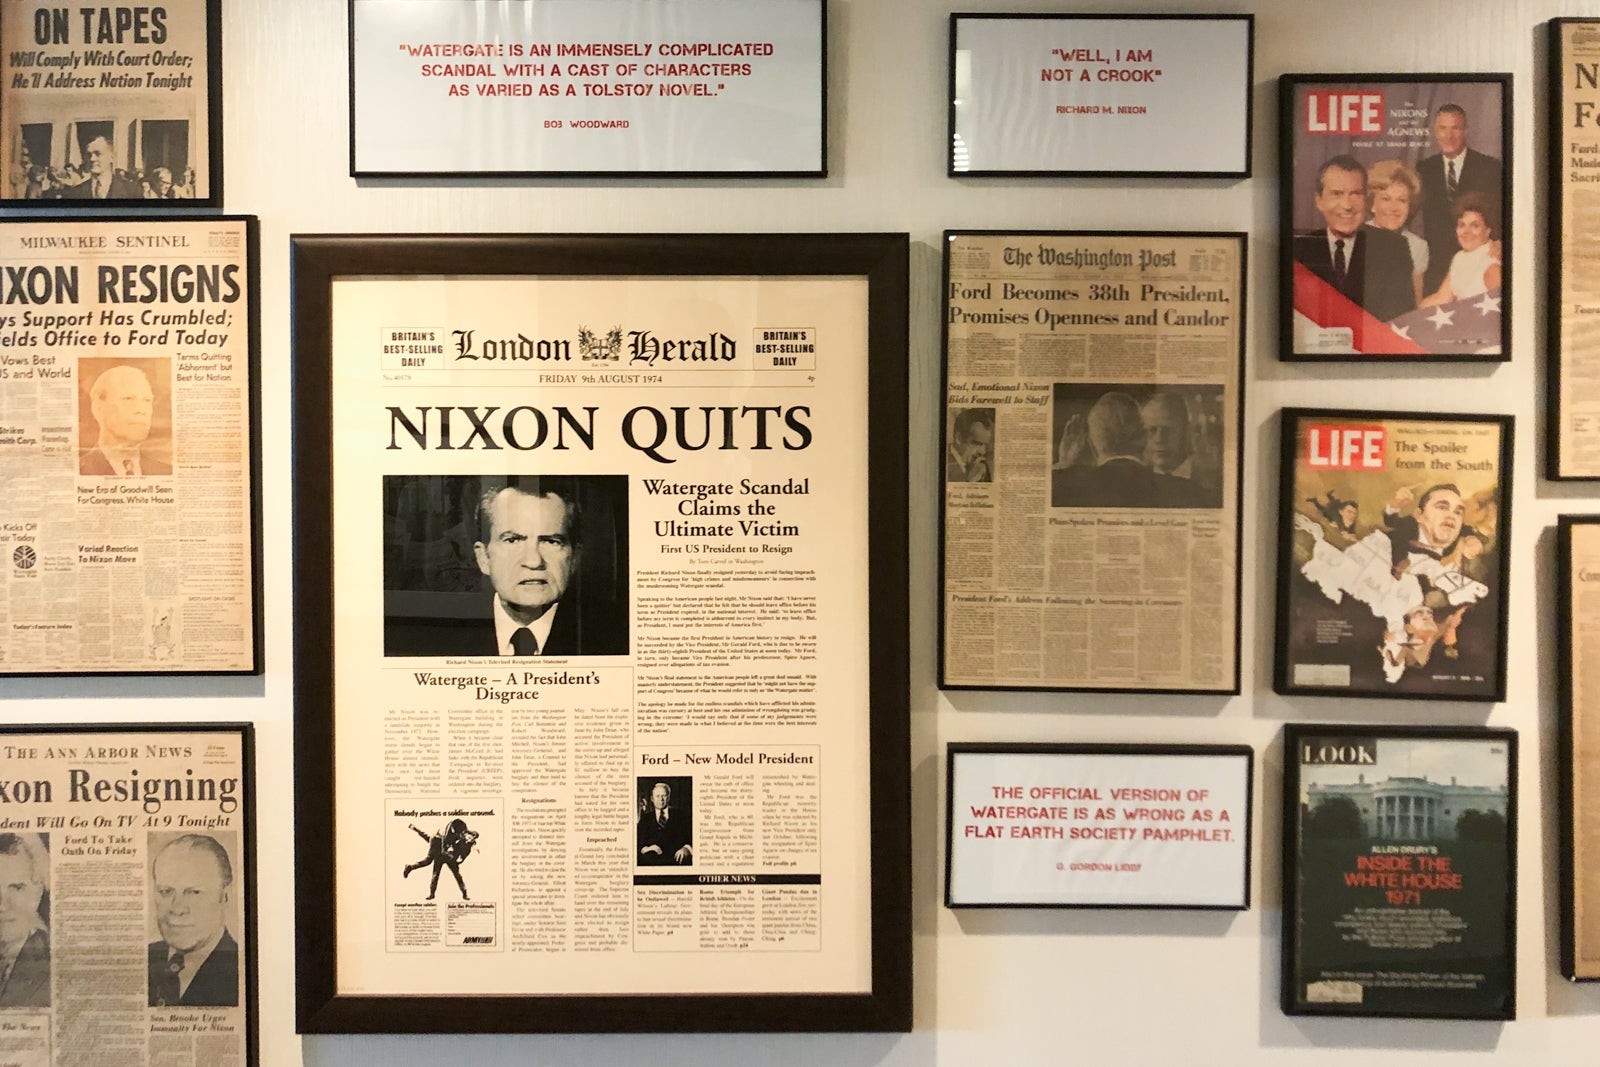 Some of the Scandal Room's most attention-grabbing artifacts include newspaper clippings about the Watergate break-in and Nixon's resignation.